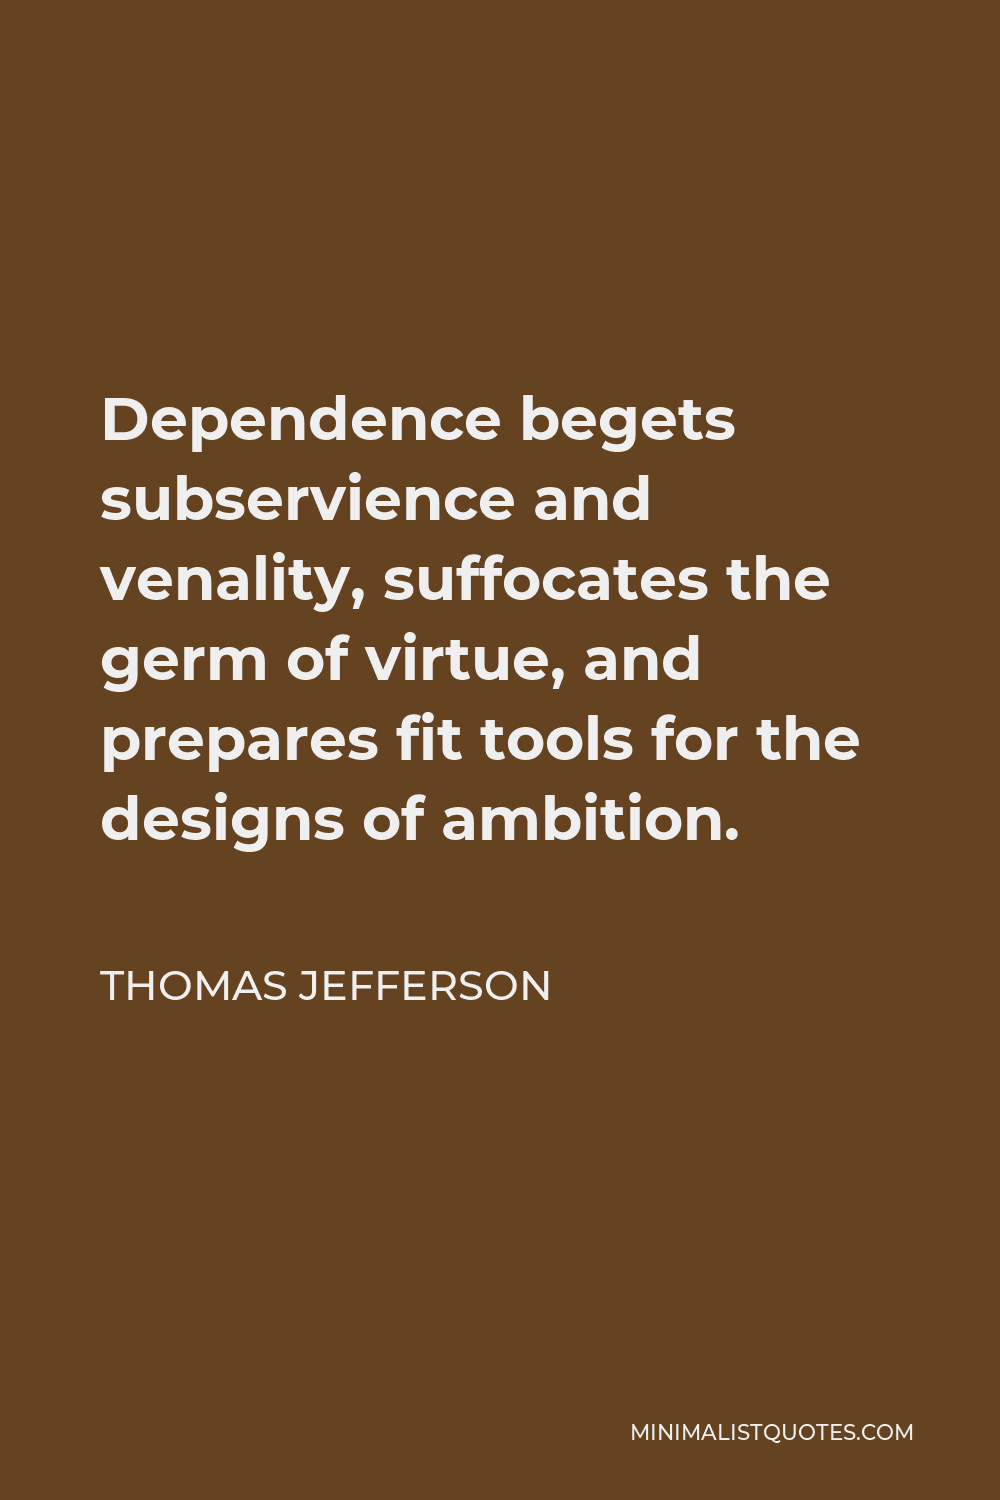 Thomas Jefferson Quote - Dependence begets subservience and venality, suffocates the germ of virtue, and prepares fit tools for the designs of ambition.